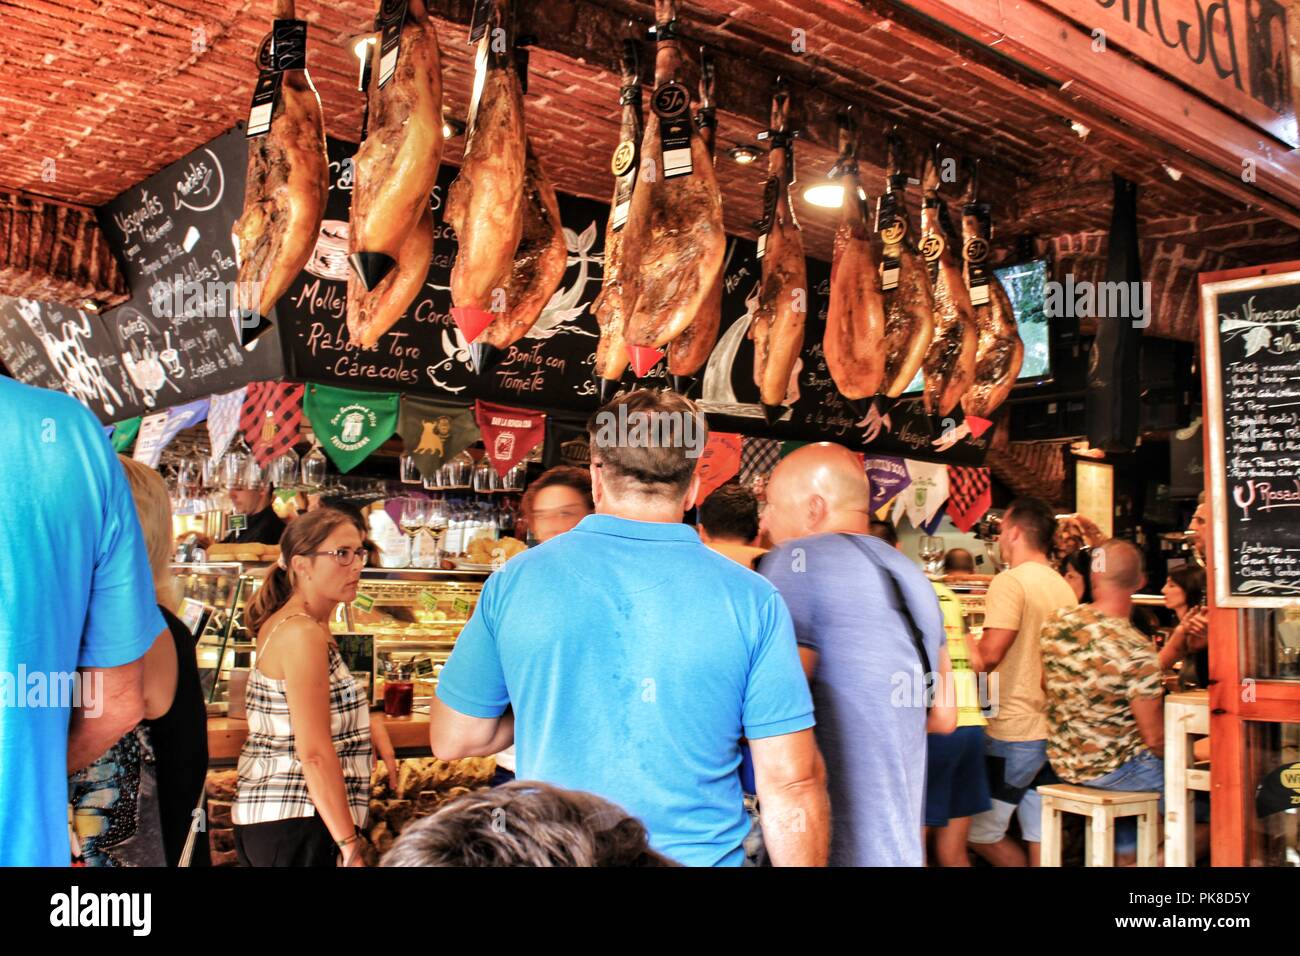 Benidorm, Alicante, Spain- September 8, 2018: Bar of typical spanish food full of people in the old town of Benidorm Stock Photo